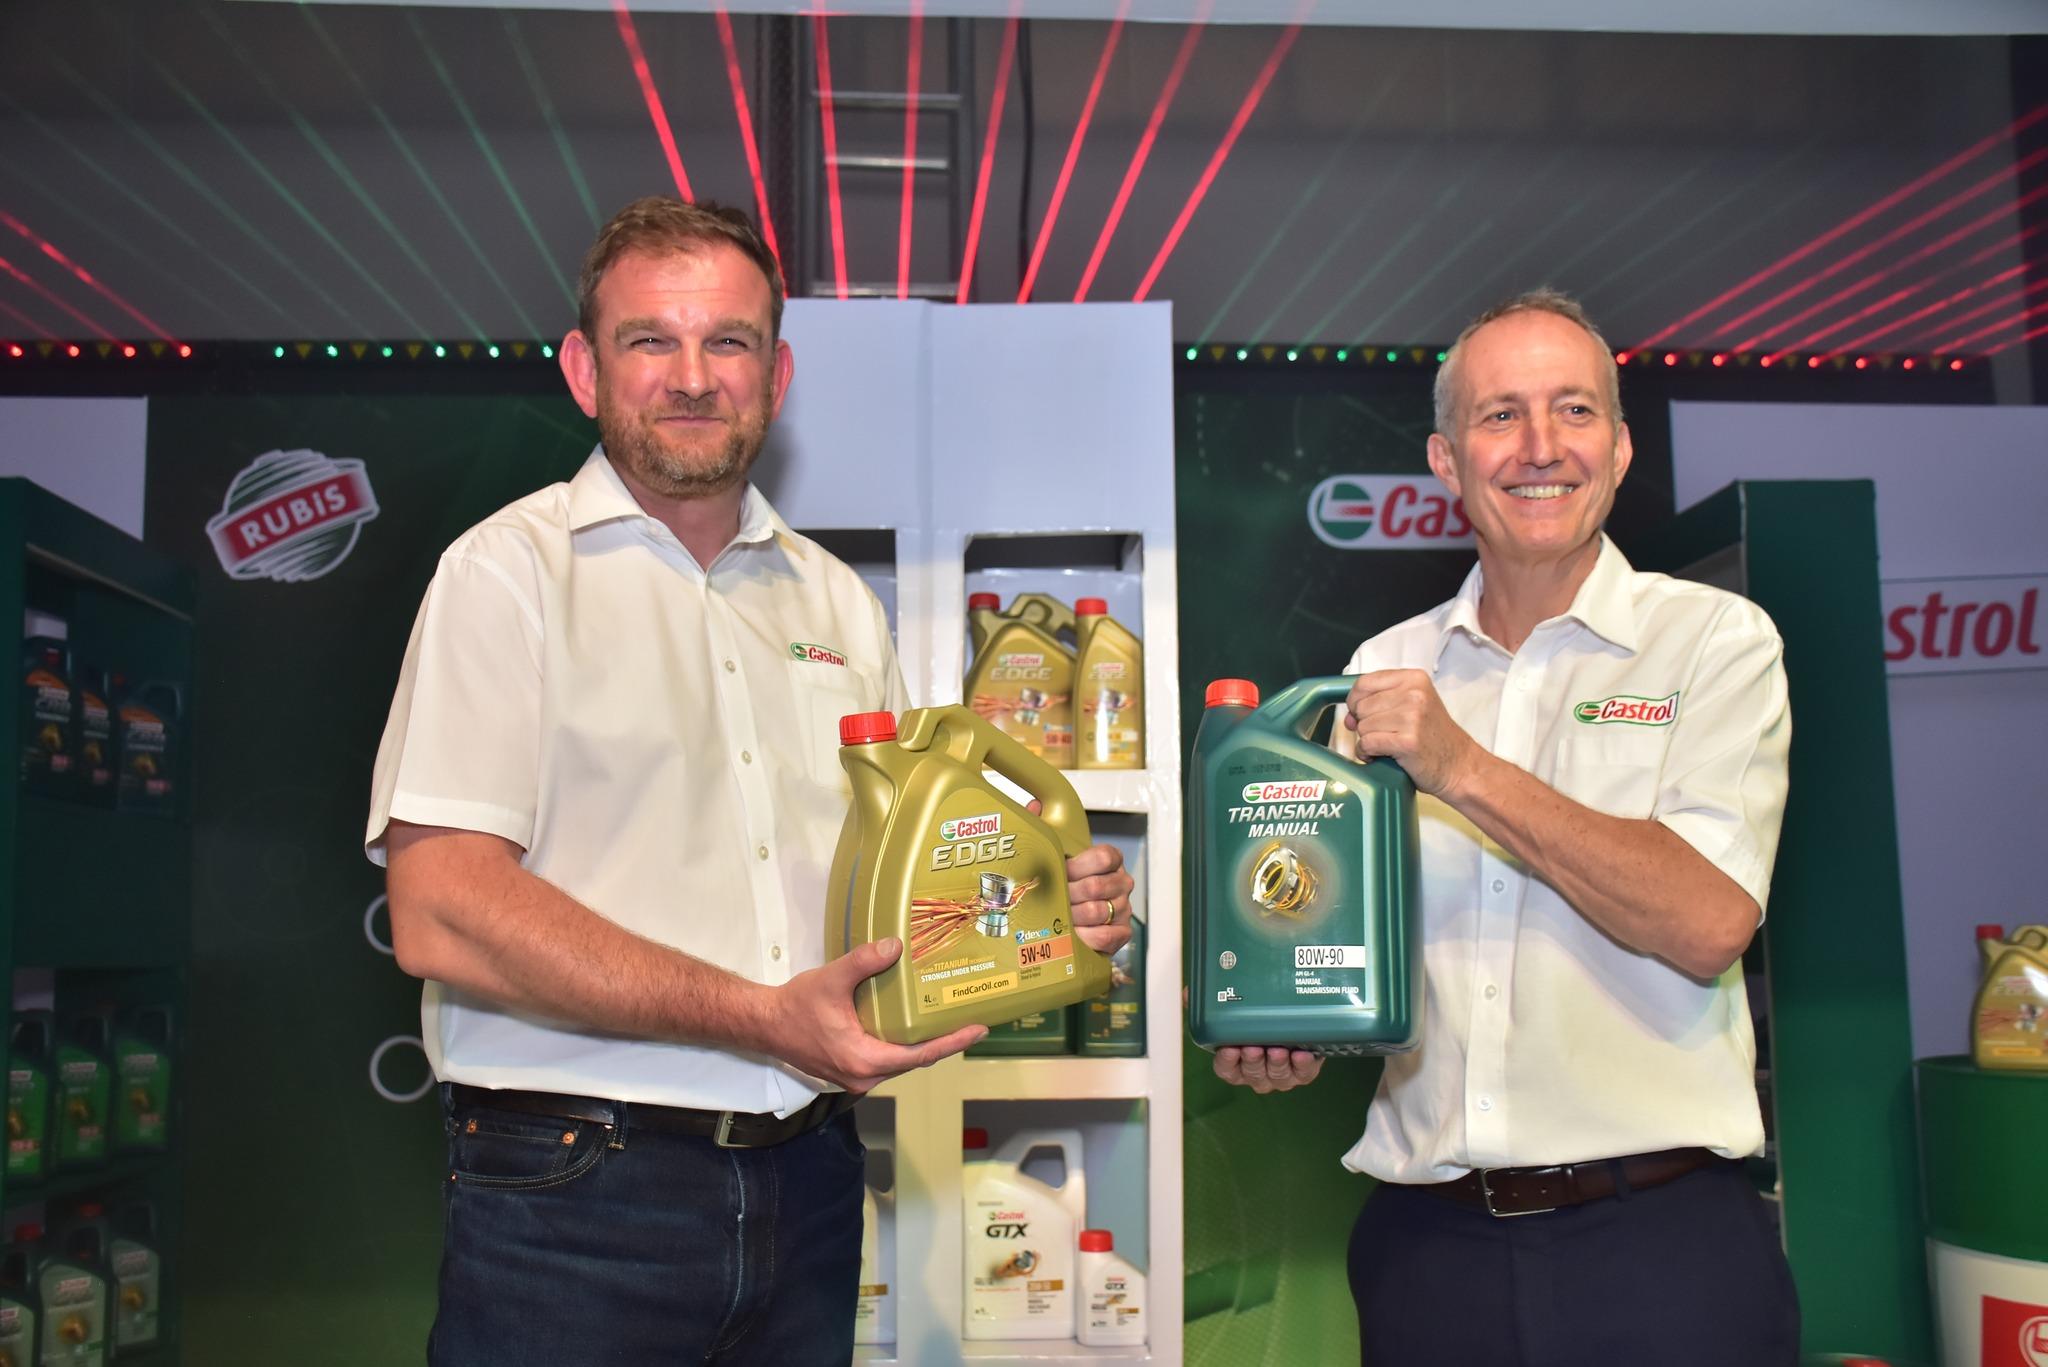 CASTROL AND RUBIS ENERGY KENYA PARTNER TO LAUNCH A WIDE RANGE OF CASTROL OIL LUBRICANTS IN KENYA